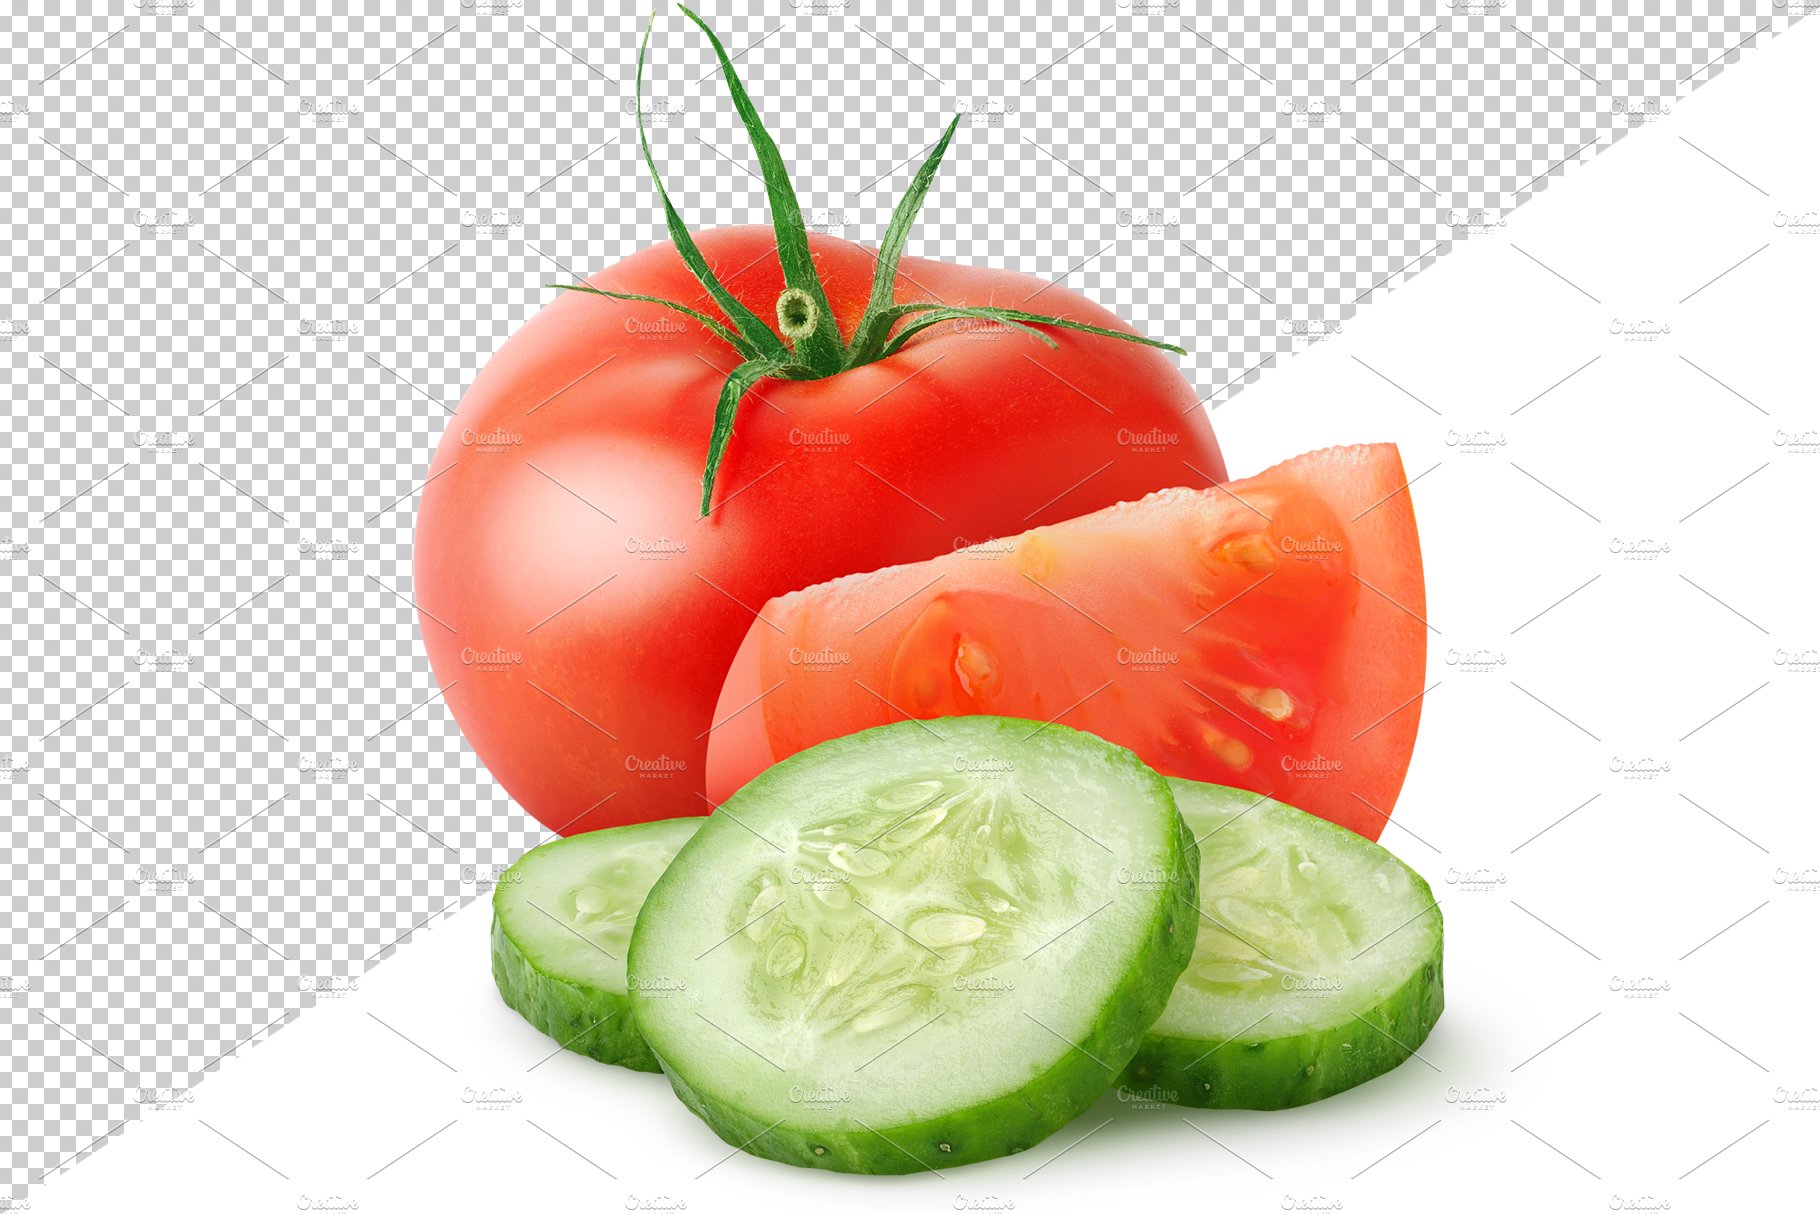 Tomato and cucumber preview image.